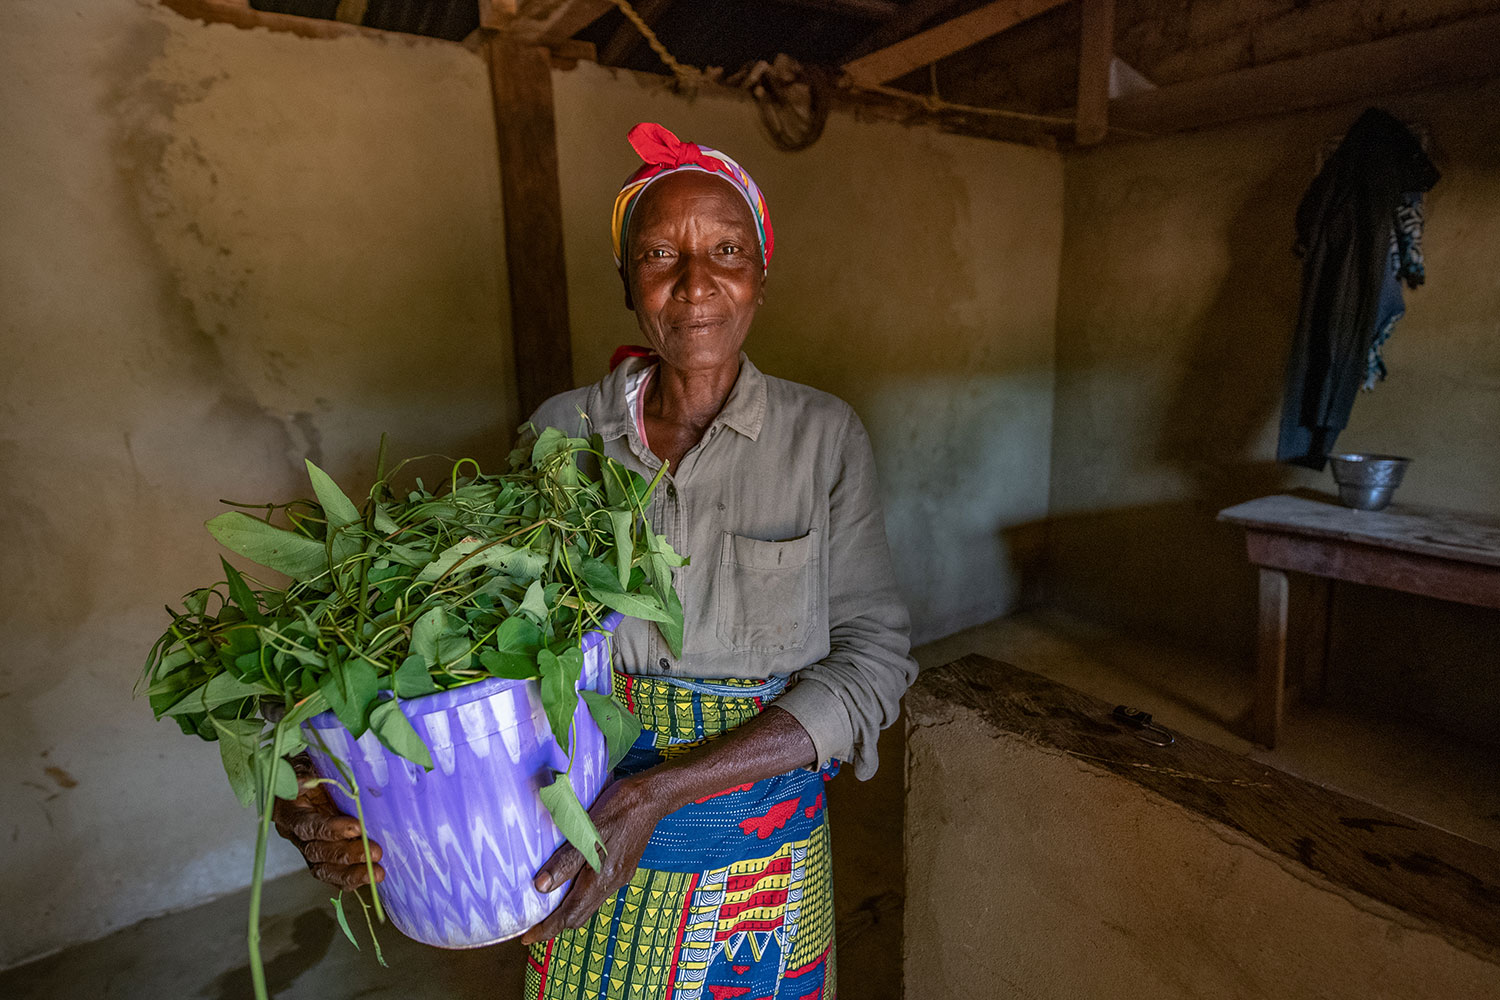 A woman in BRAC's agriculture program in Liberia poses in her home while holding a bucket of greens from her garden.